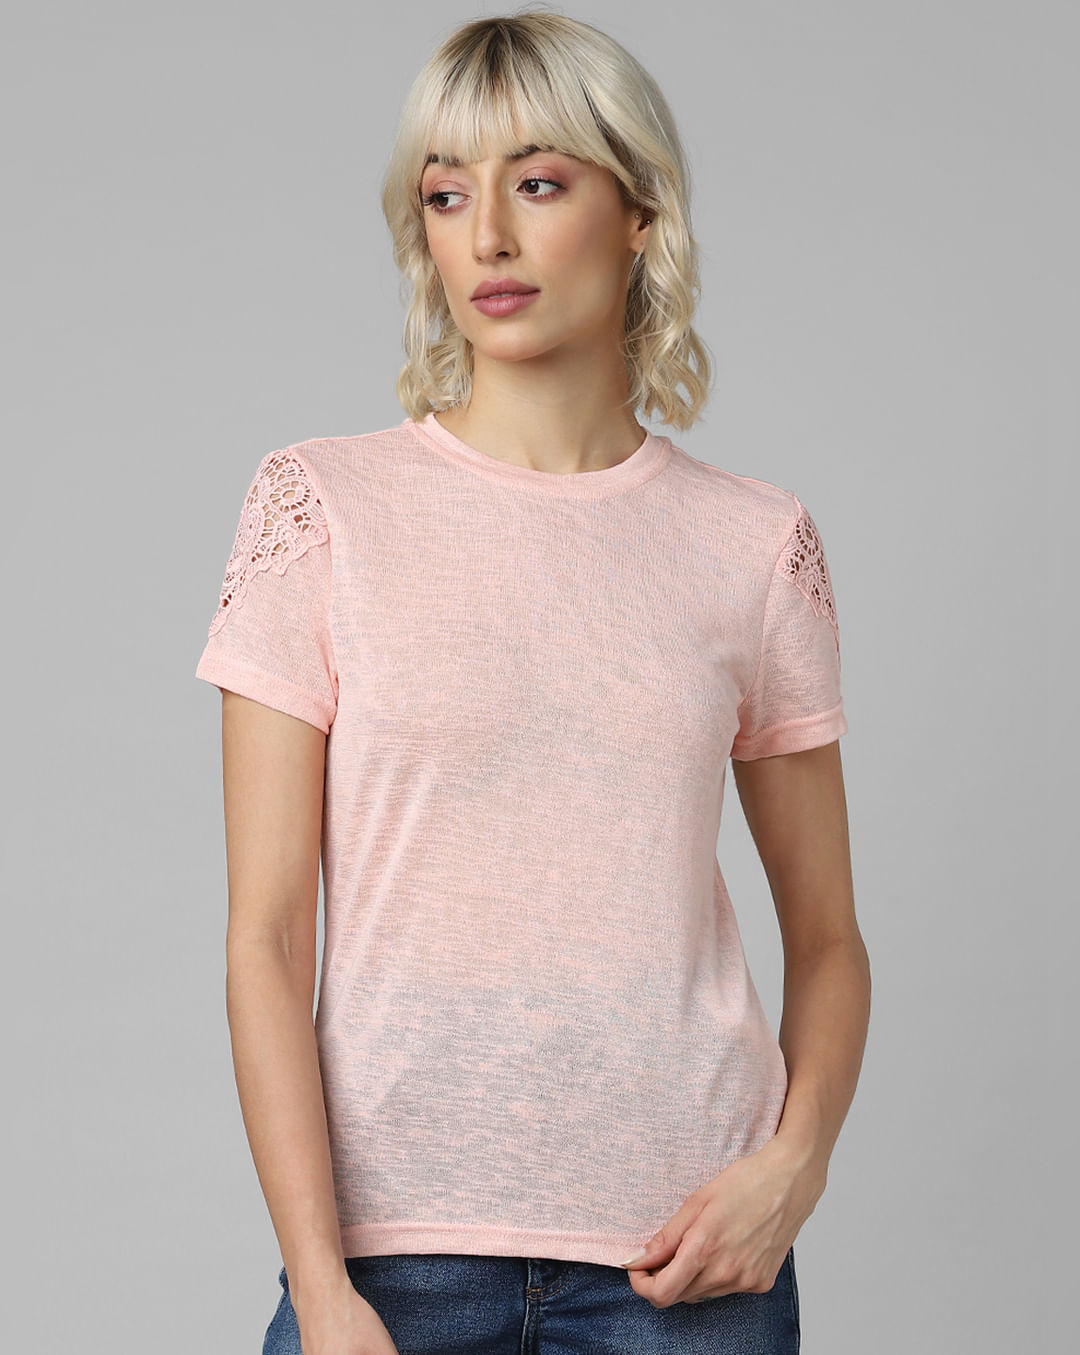 Buy Pink Lace Tops Online